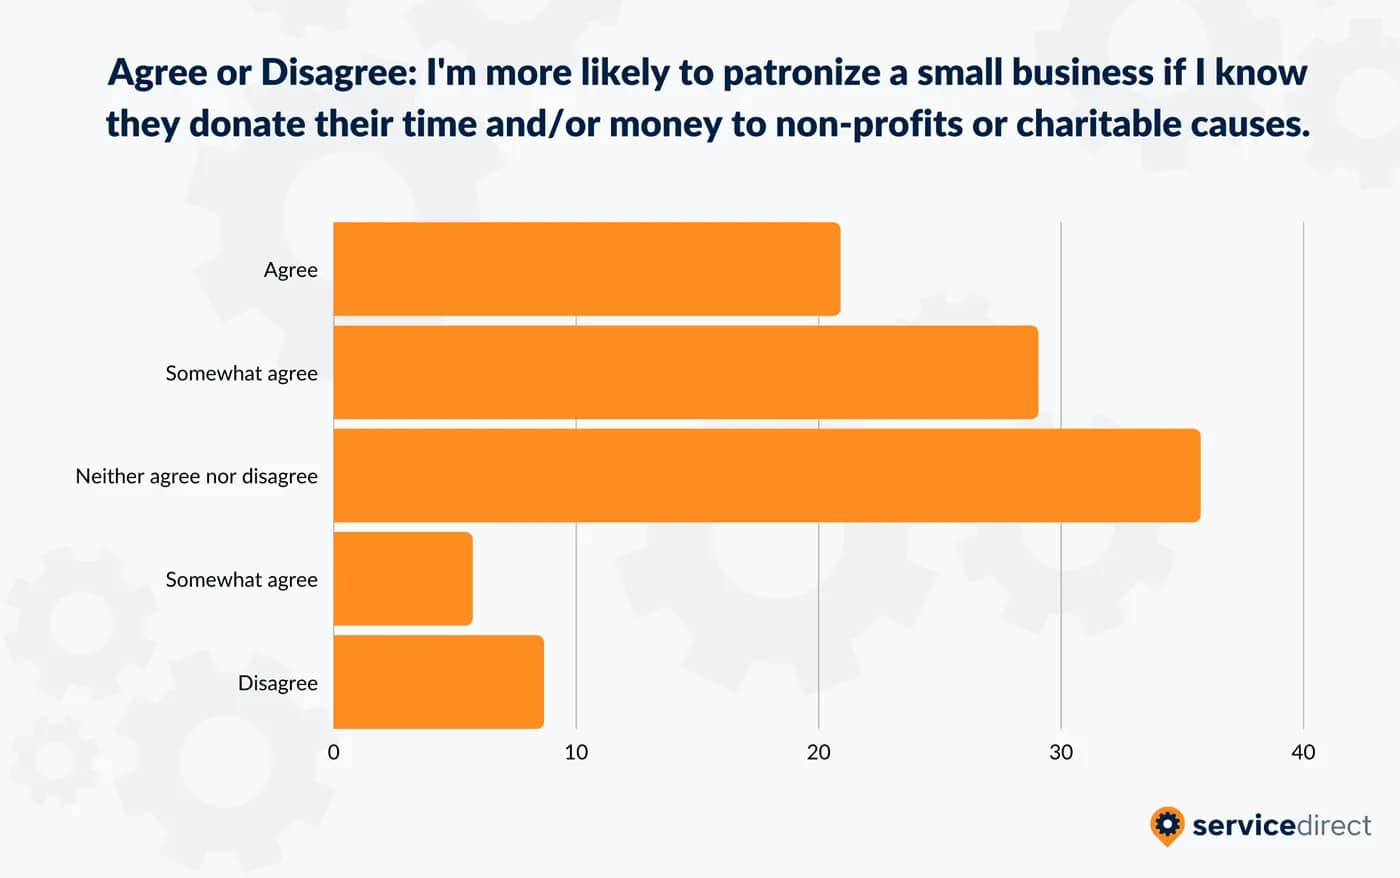 Importance-of-Charitable-Causes-When-Patronizing-Small-Business-ORM